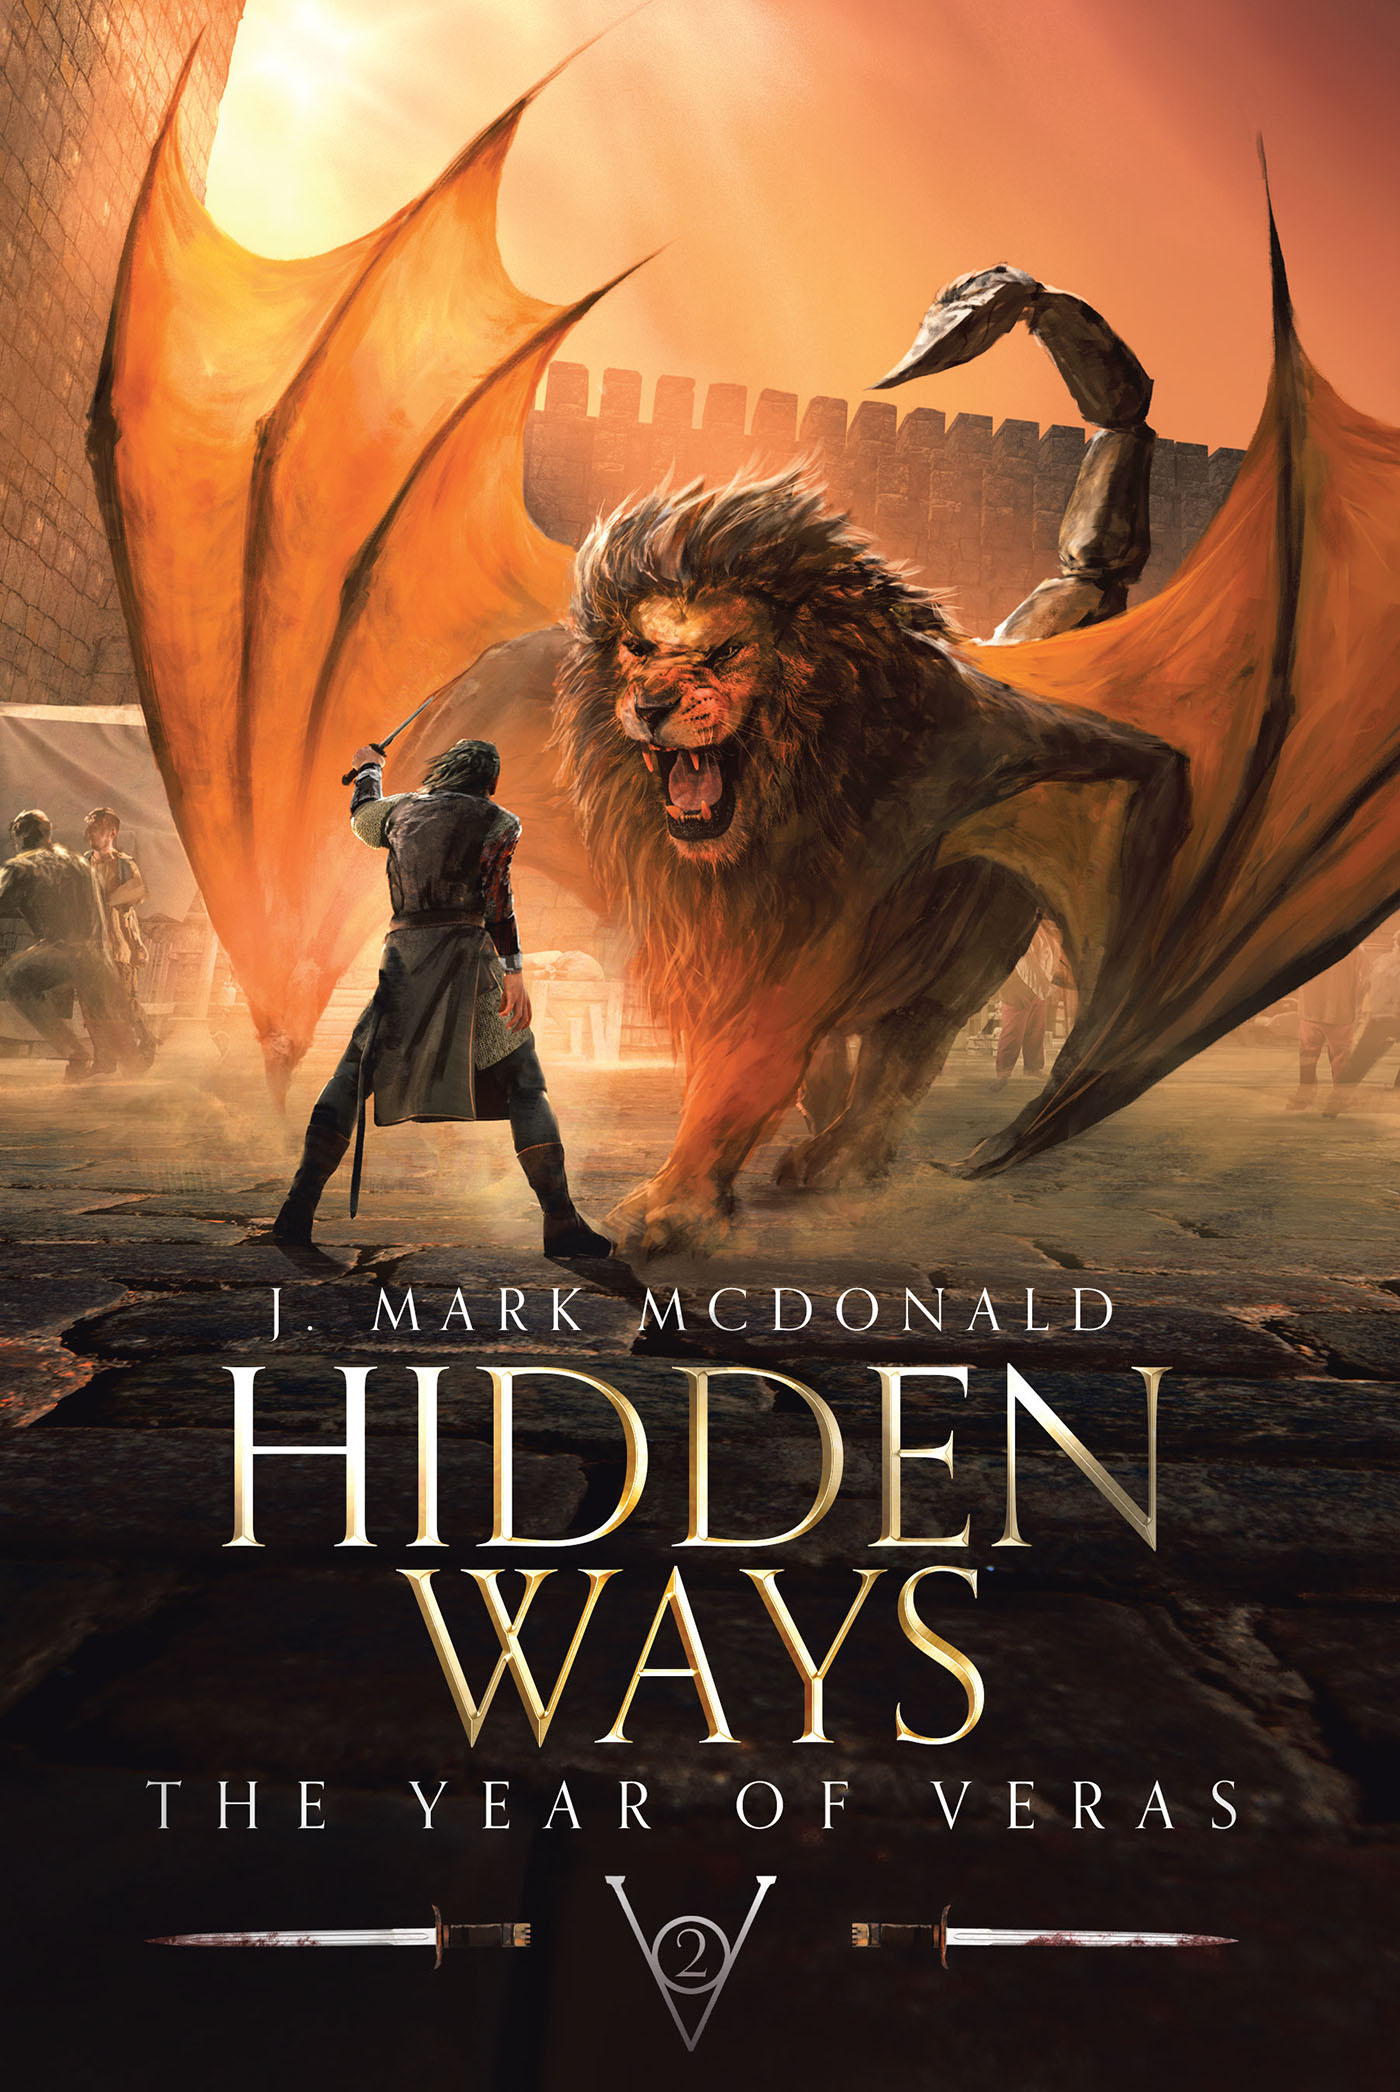 J. Mark McDonald’s Newly Released “Hidden Ways: The Year of Veras Book 2” is an Exciting Continuation of a Vividly Imagined Fantasy Tale